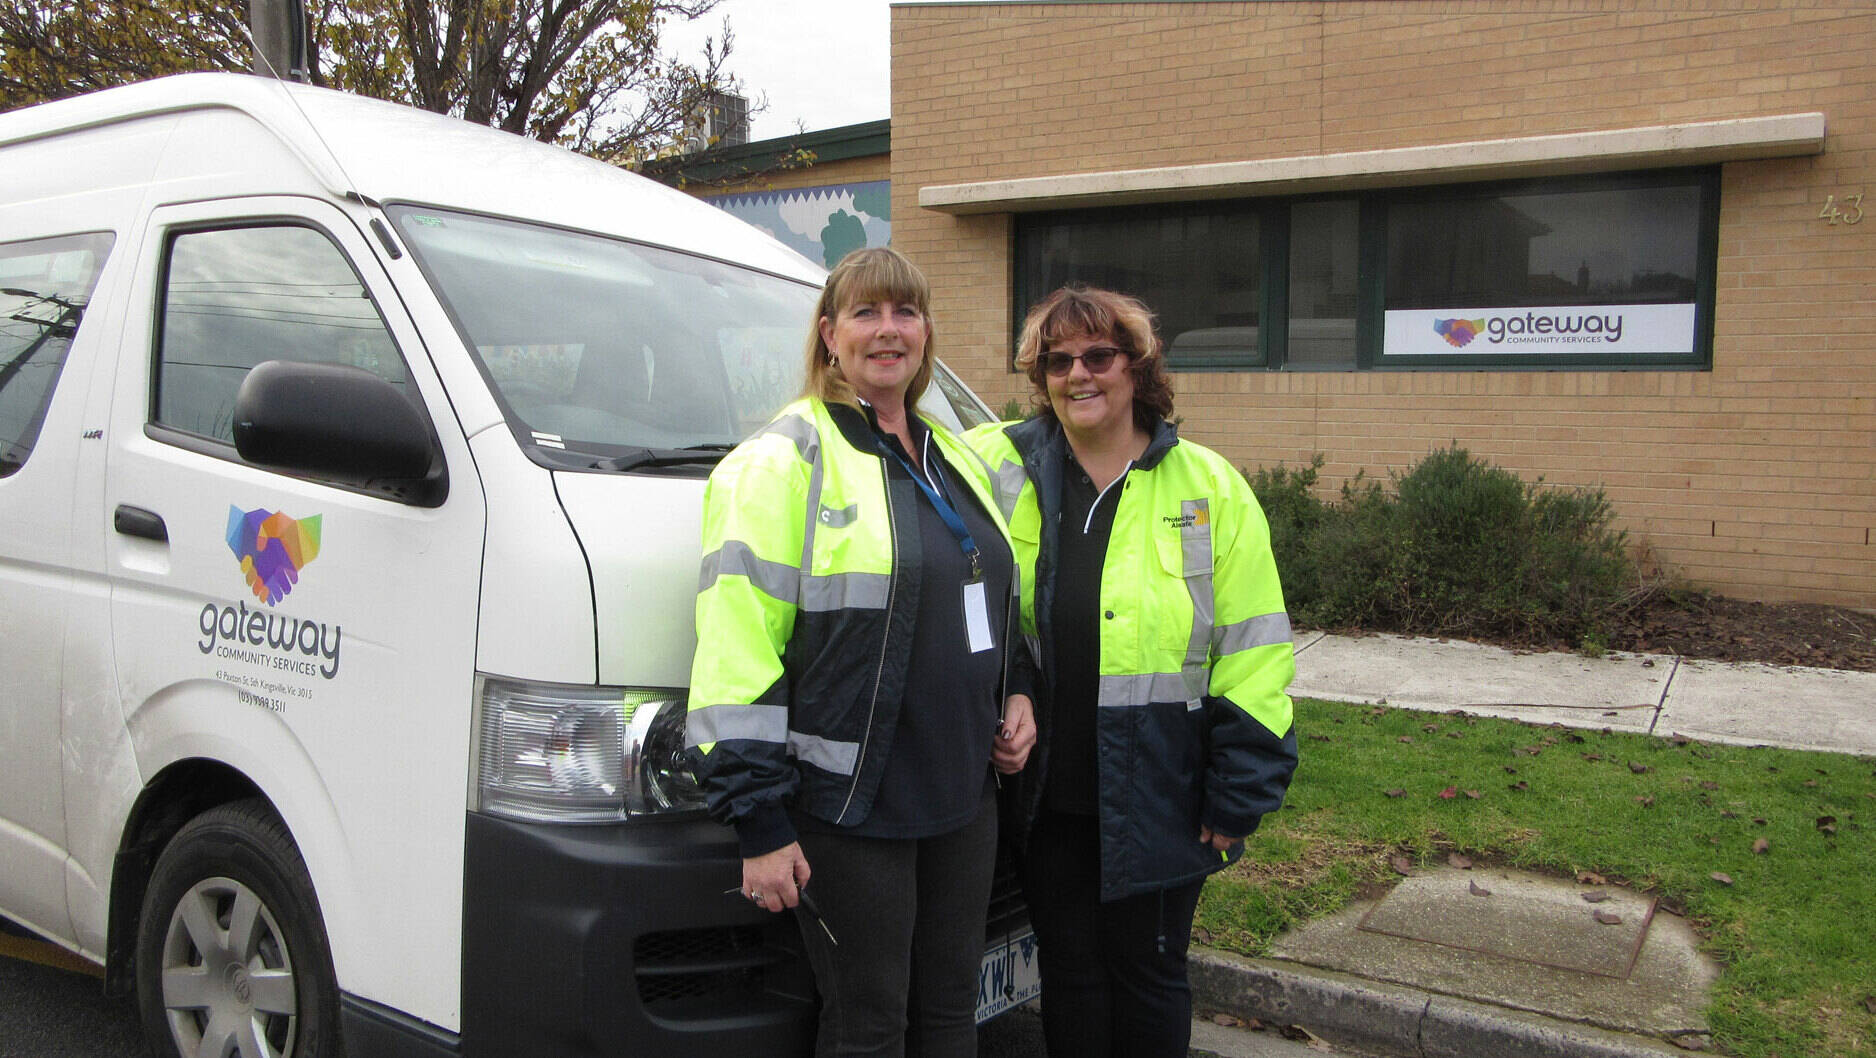 Image Photo— Gateway volunteers Lucy and Debbie sporting their new jackets.